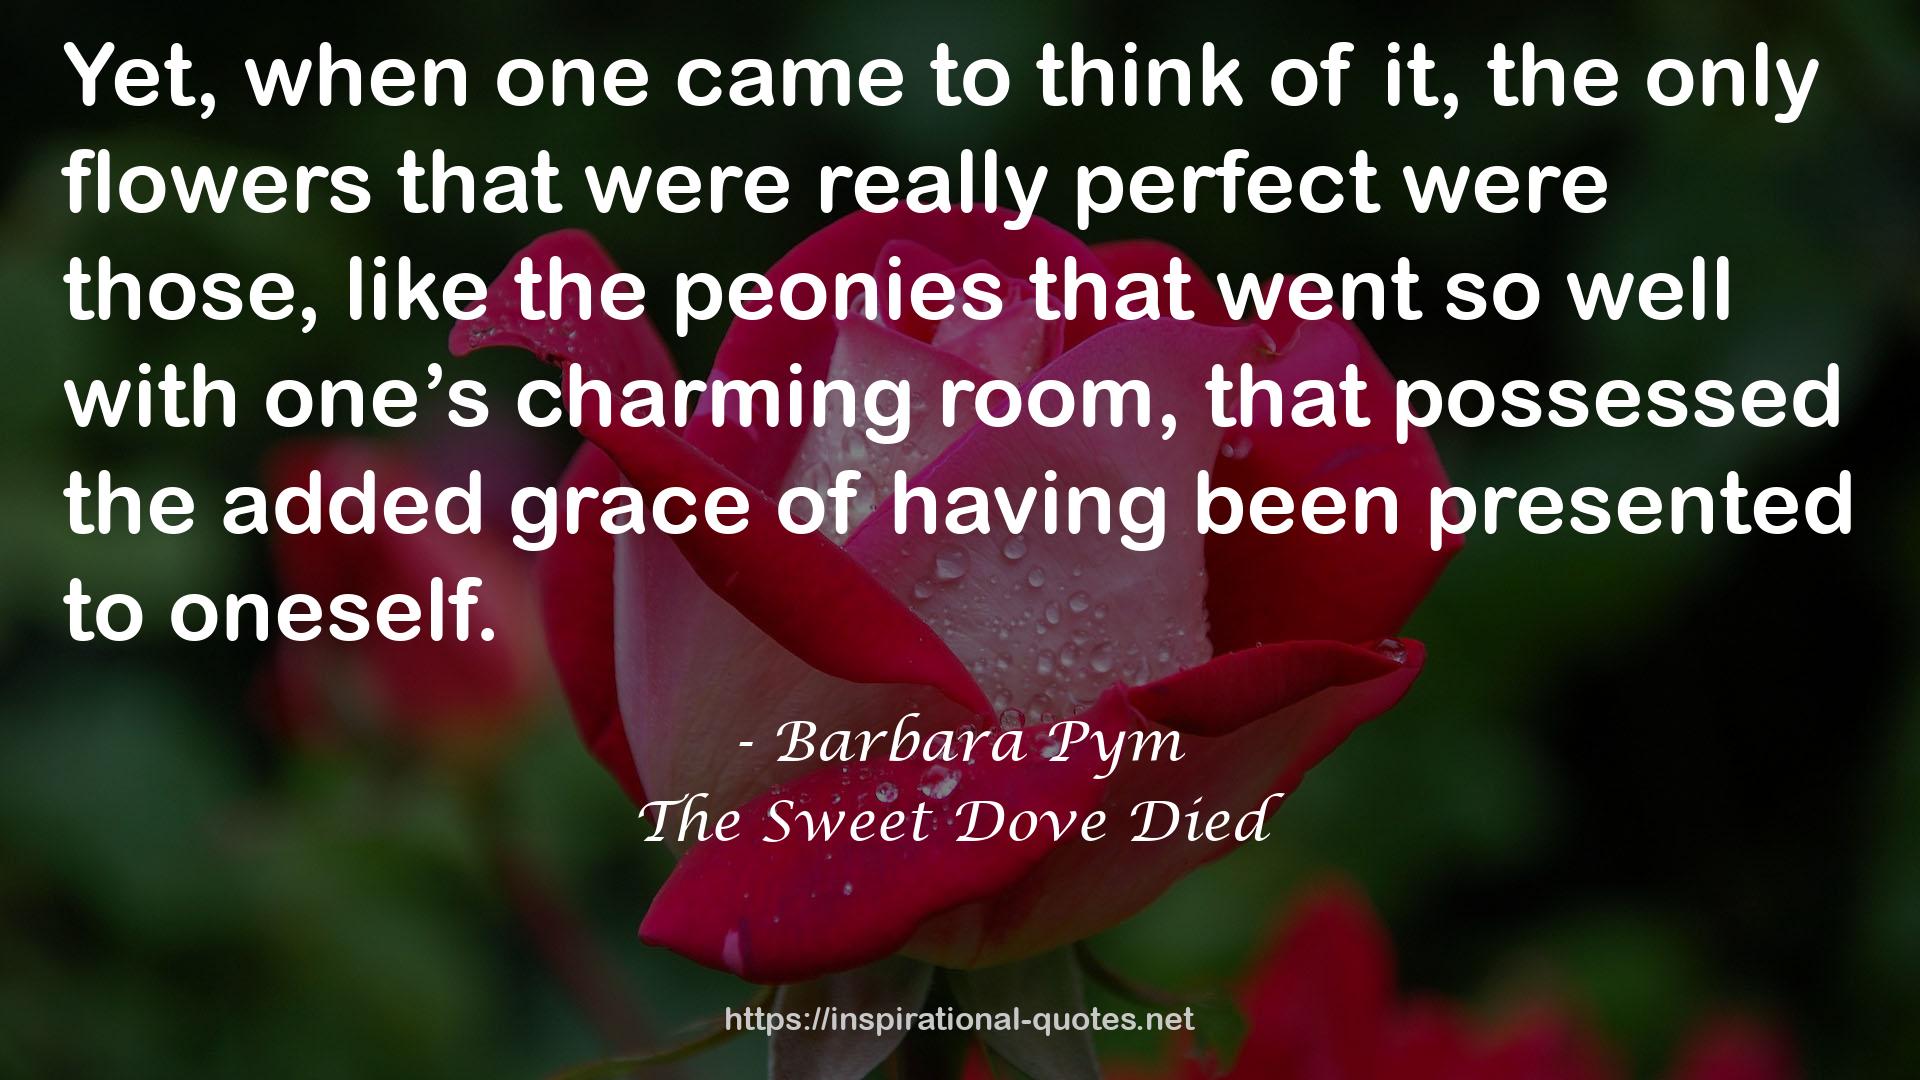 The Sweet Dove Died QUOTES